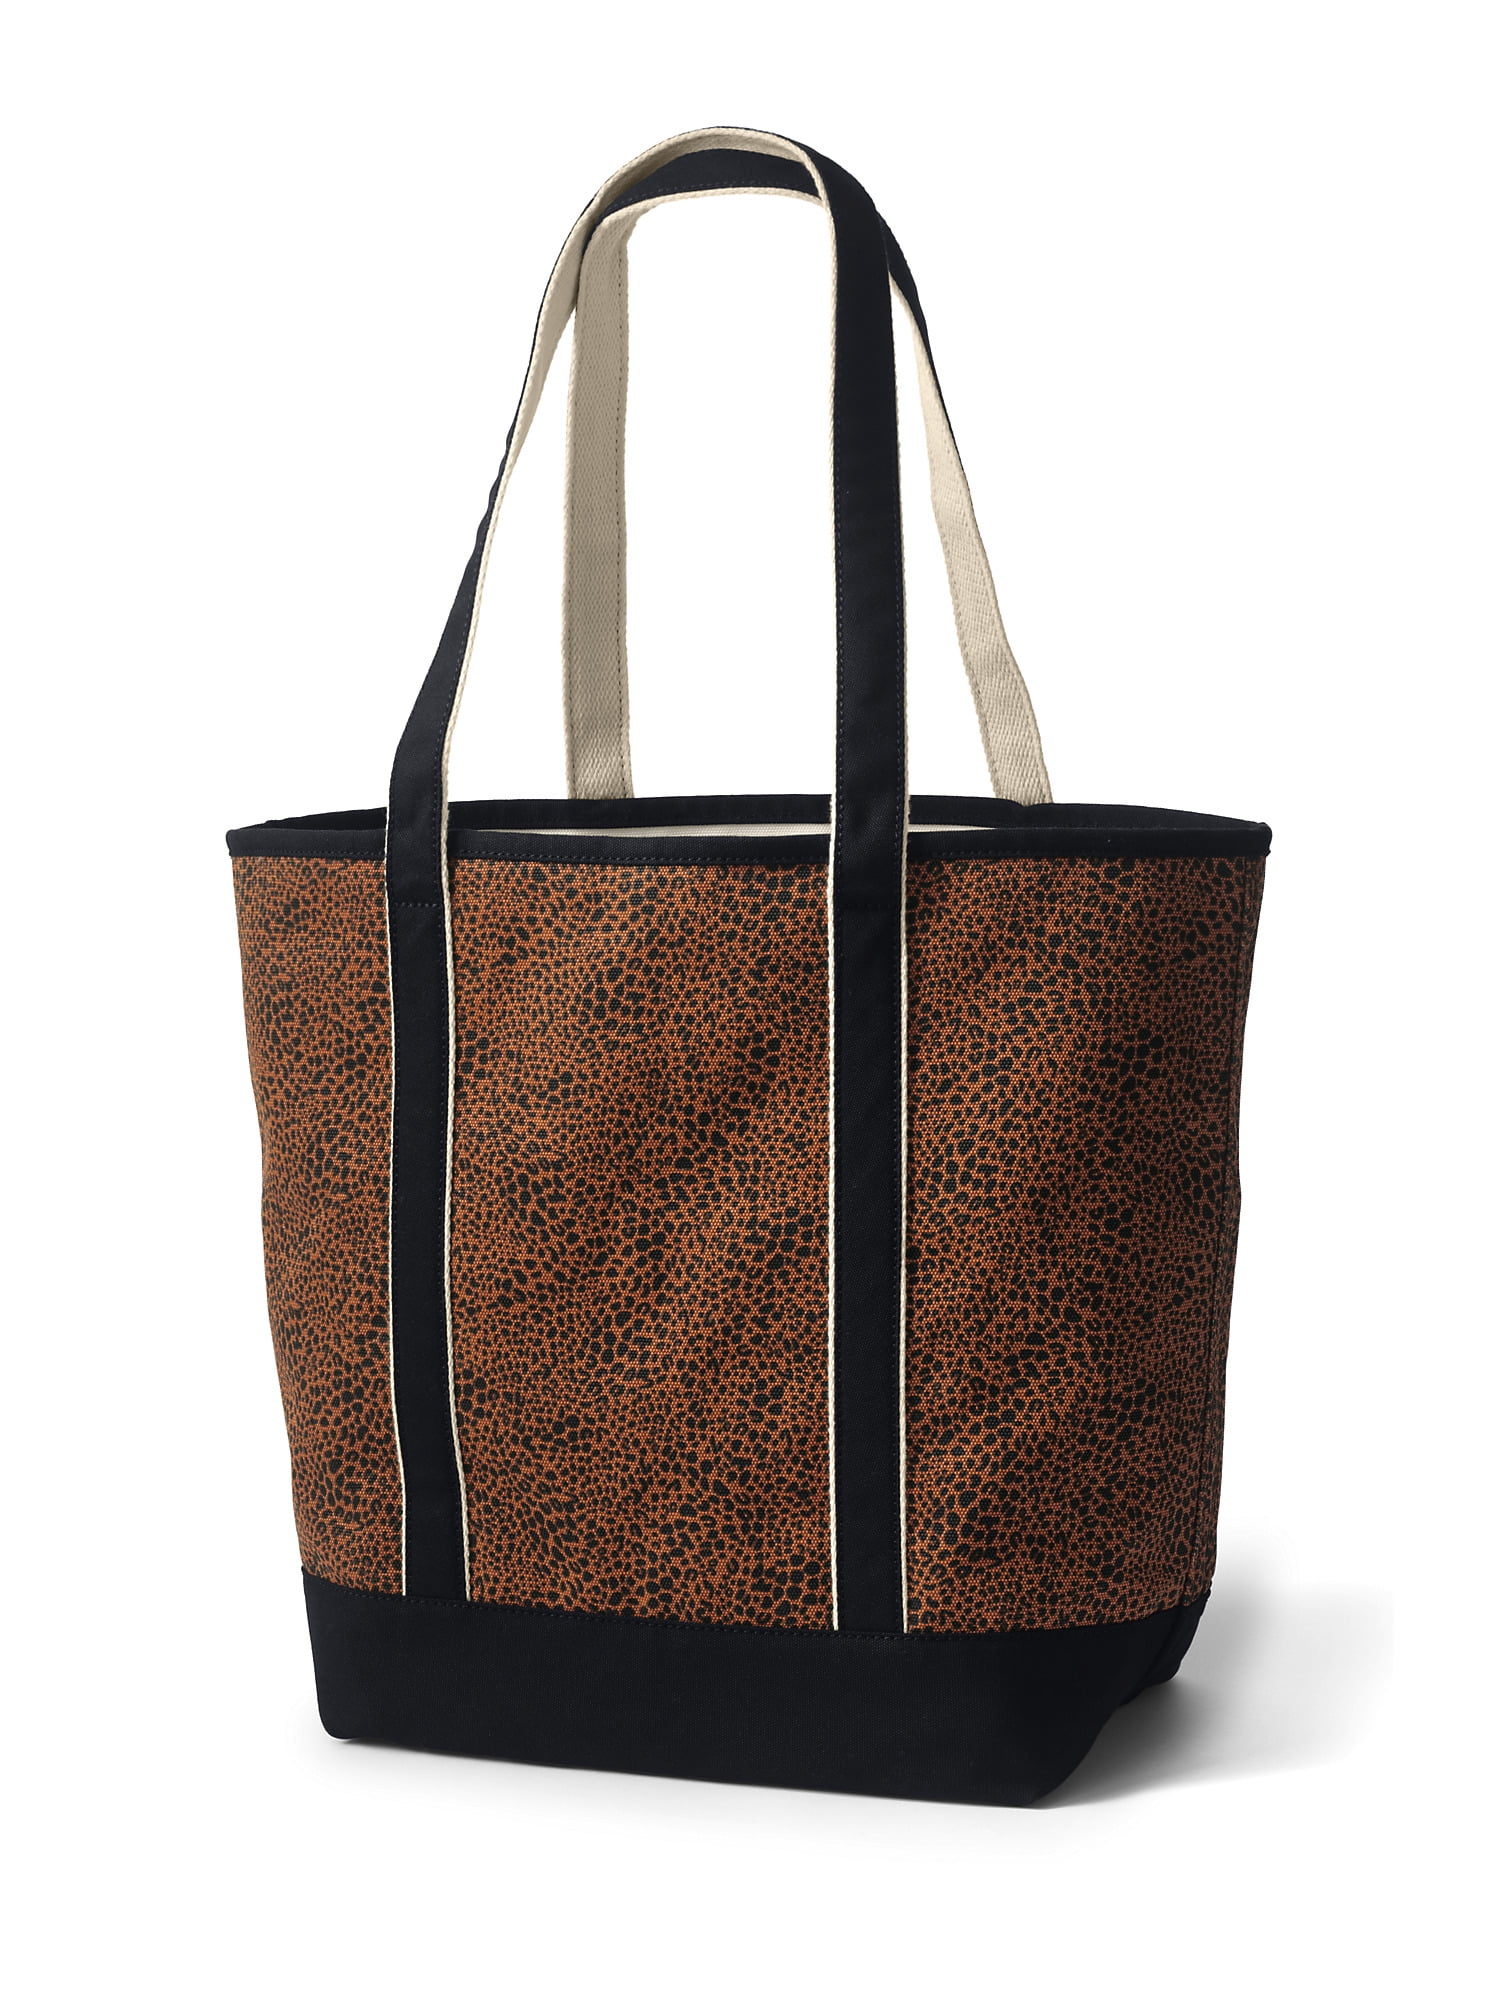 Land’s End Large Natural Open Top Canvas Tote Bag